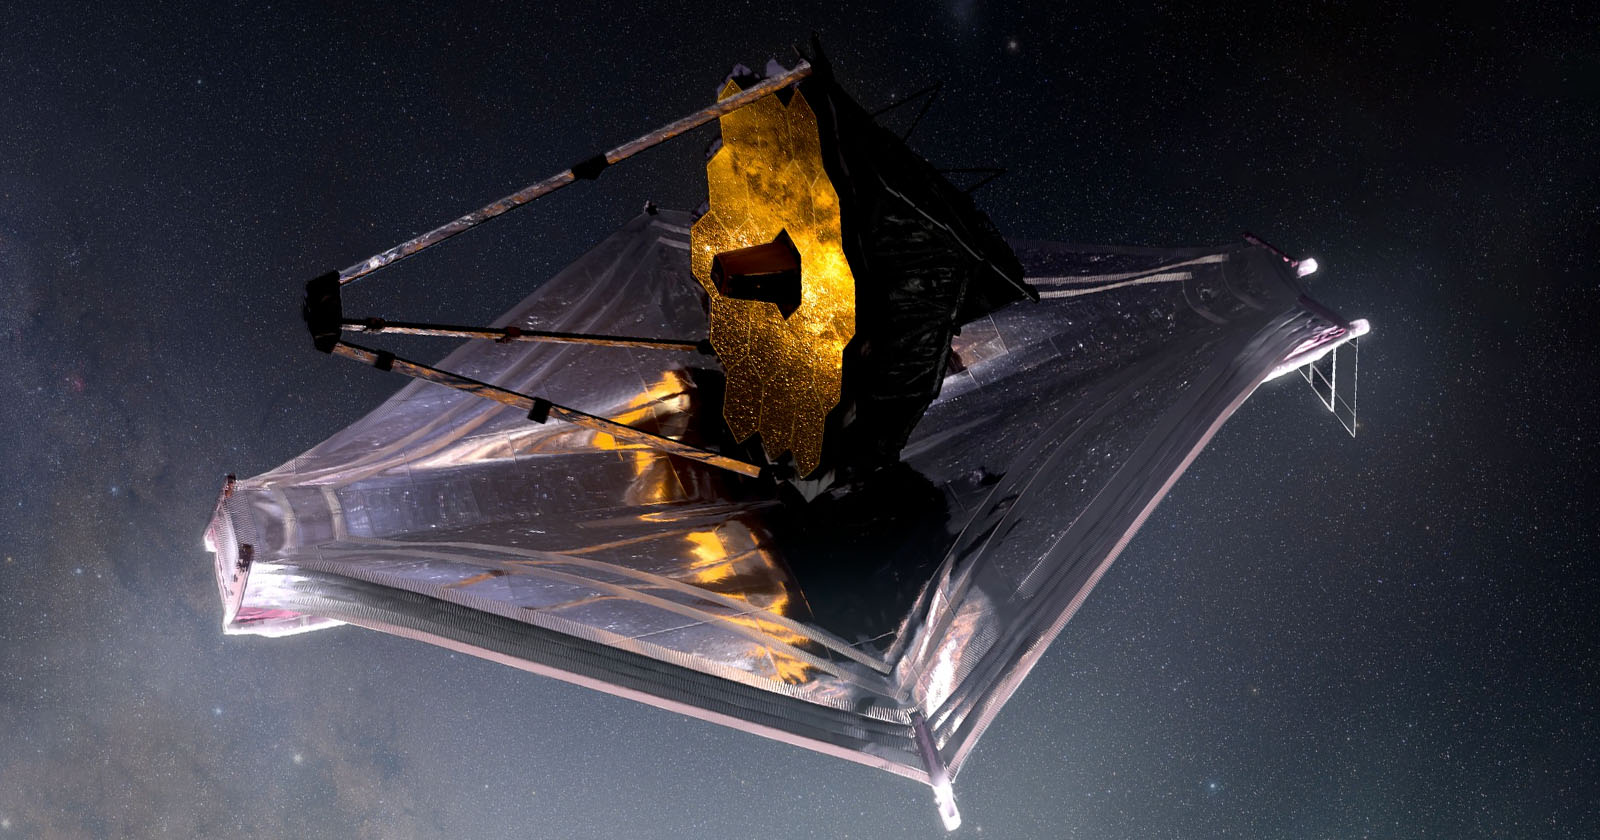 NASA has paused the use of one of the modes on the James Webb Space Telescope’s (JWST) Mid-Infrared Instrument (MIRI) due to what it describes a